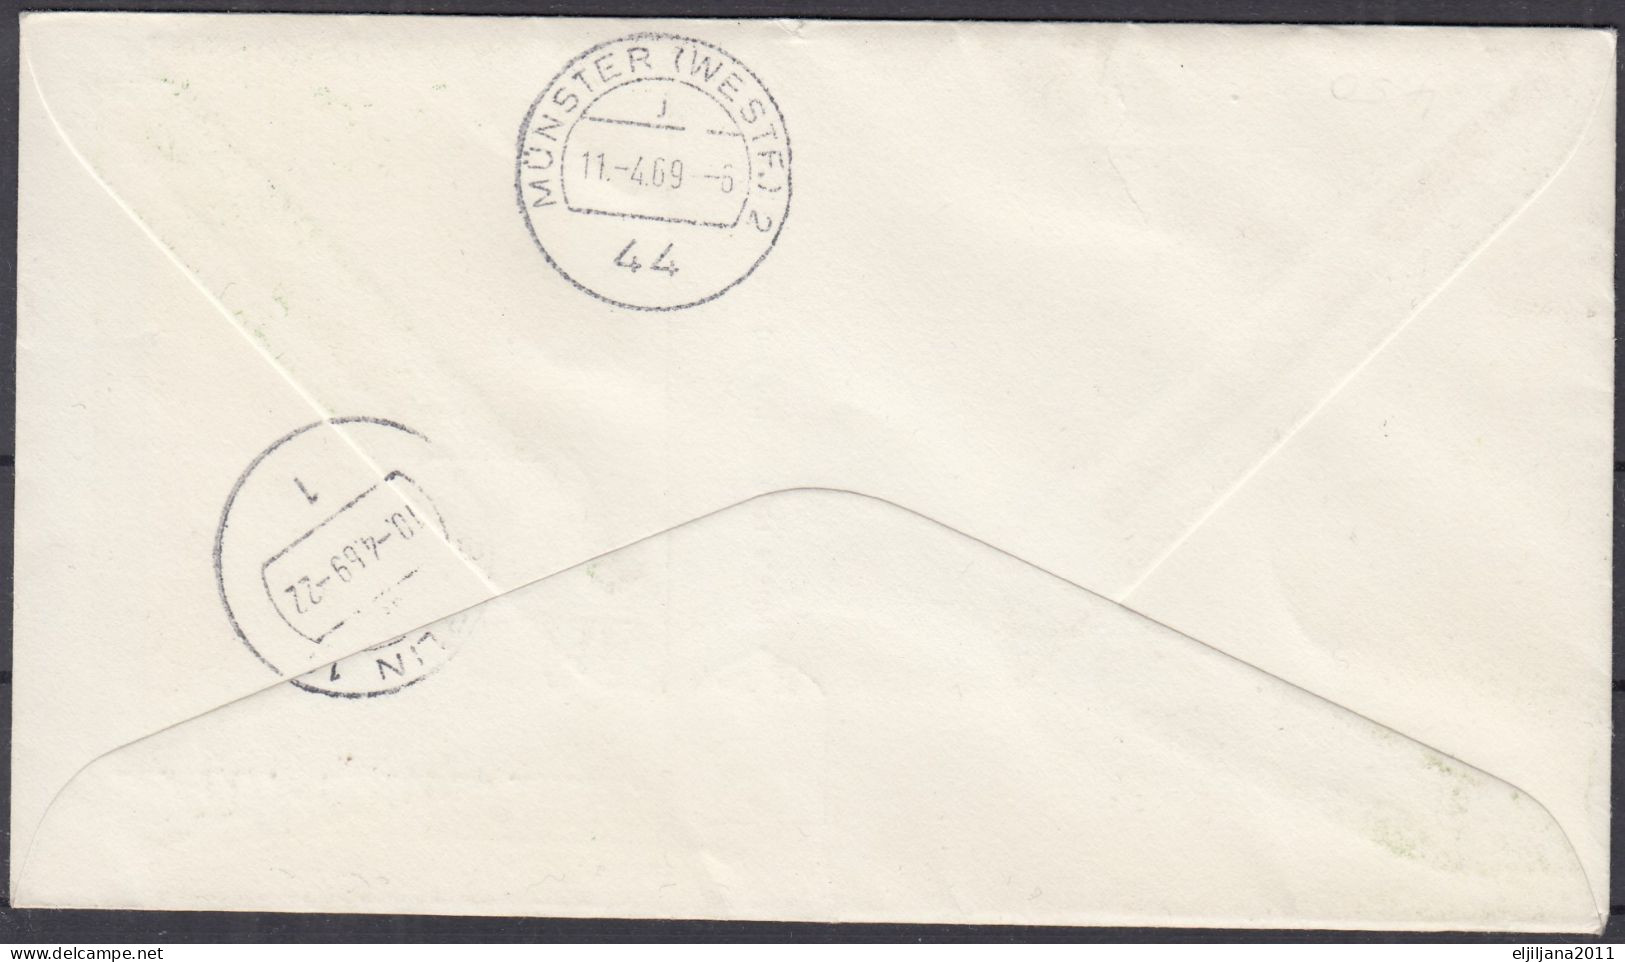 Action !! SALE !! 50 % OFF !! ⁕ Germany BERLIN 1969 ⁕ Mi.284 German Buildings 1.30 DM ⁕ FDC Cover Traveled EXPRES - 1950-1970